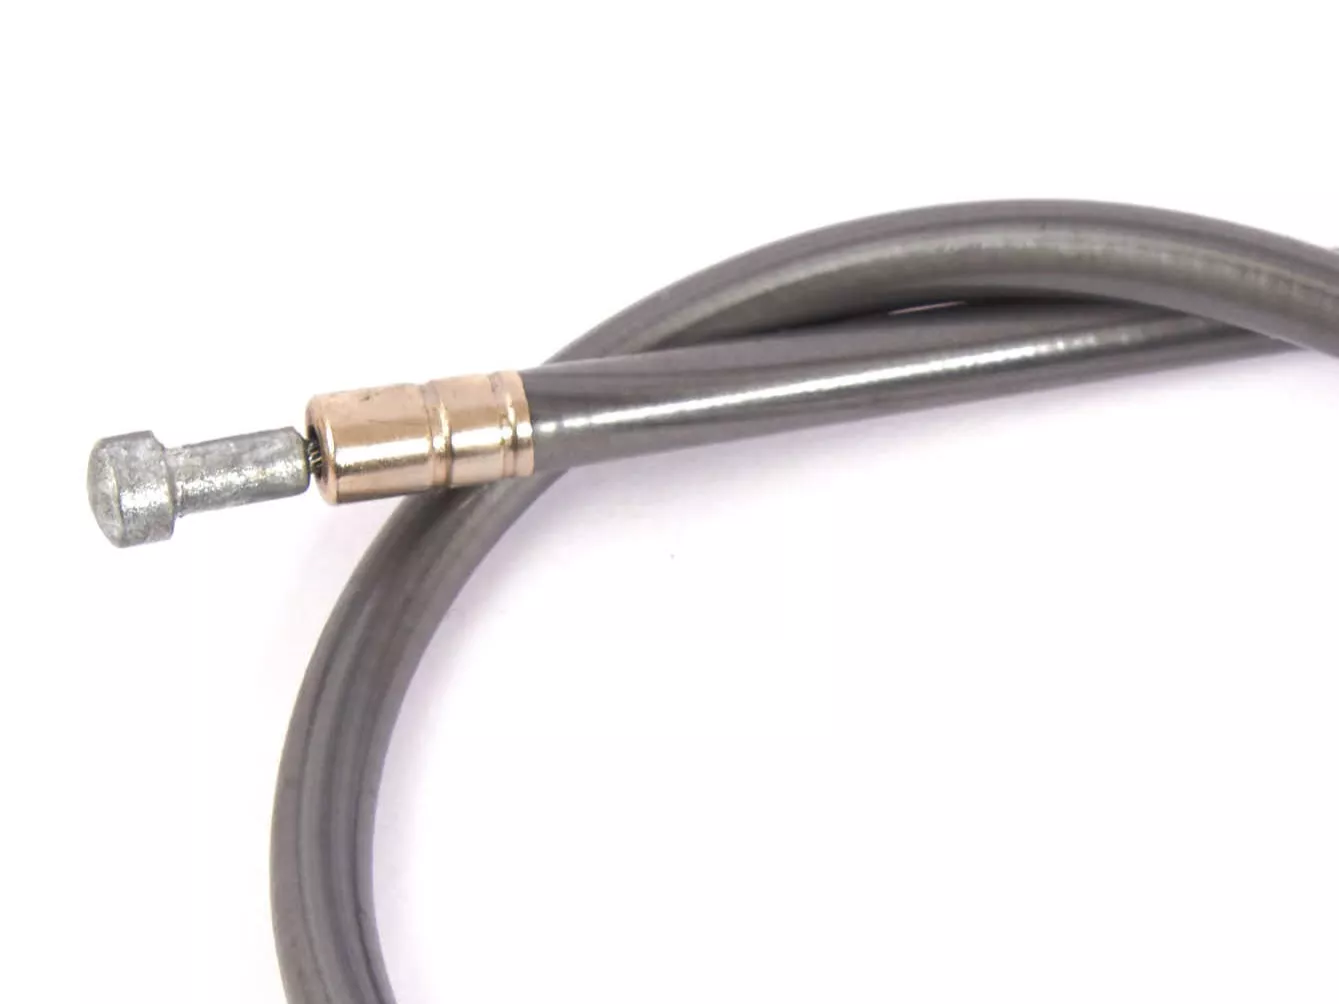 FIXIE brake cable KHE 410mm